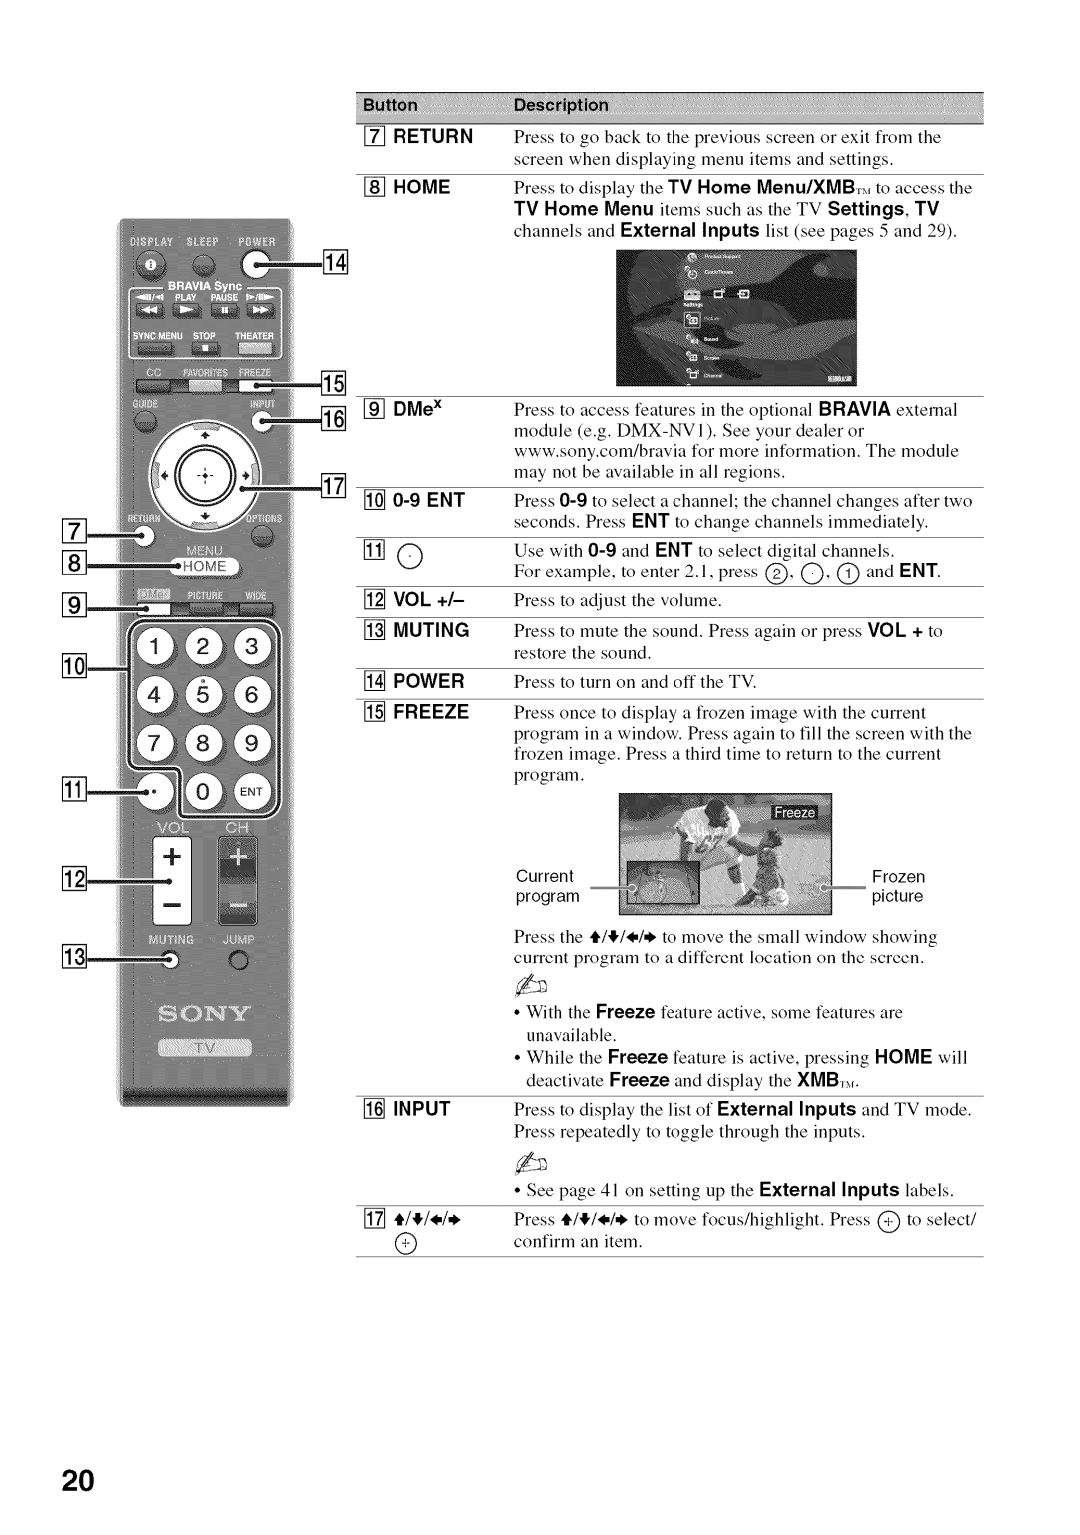 Sony KDL52V4100 operating instructions RETURN HOME DMe, Vol +, Muting, Power, Freeze, Inputs labels 